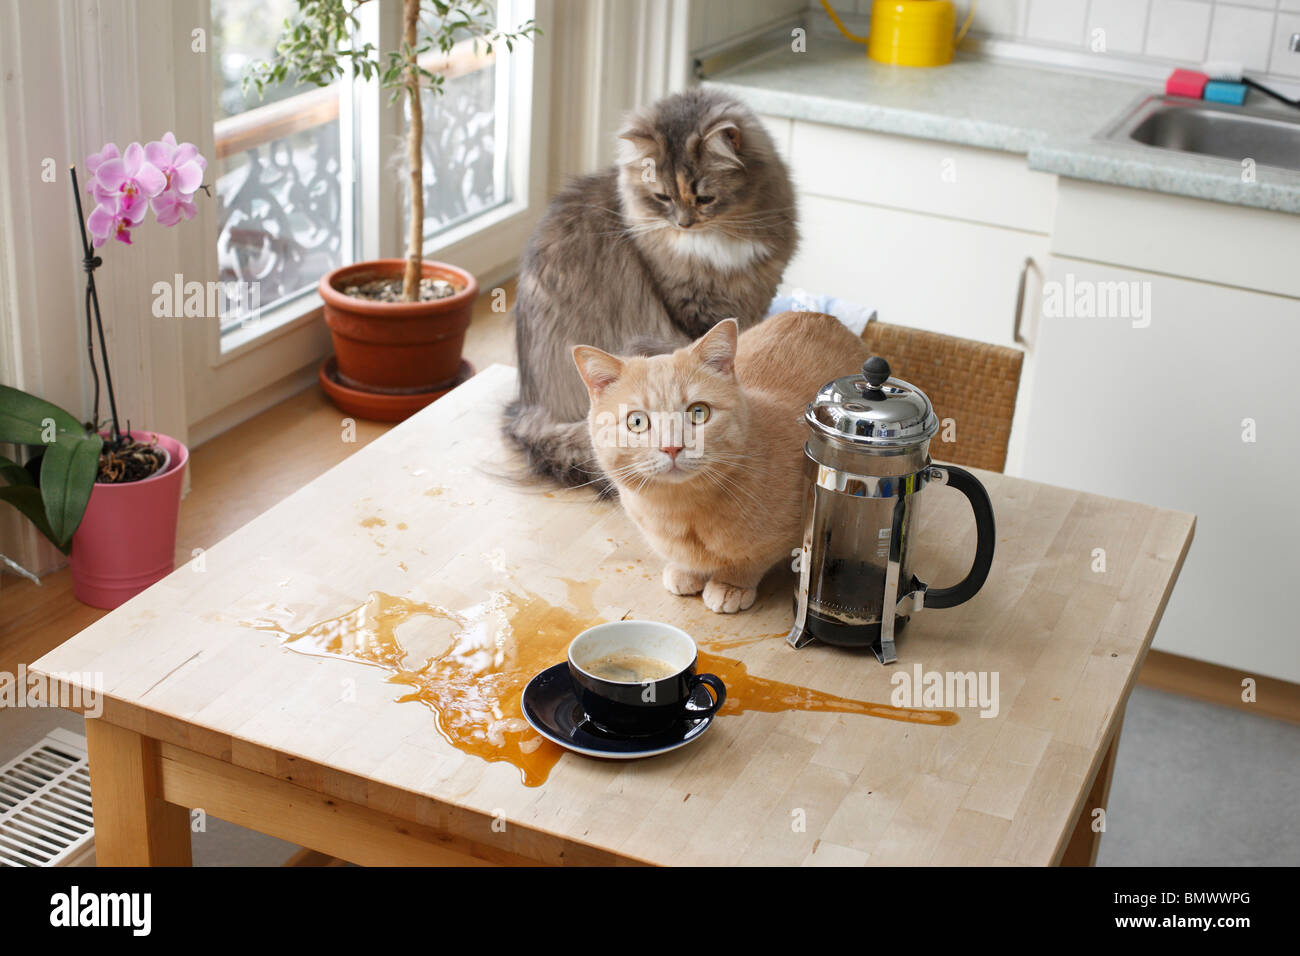 British Shorthair (Felis silvestris f. catus), two 2 years old cats sitting on a kitchen table having overthrown a cup of coffe Stock Photo